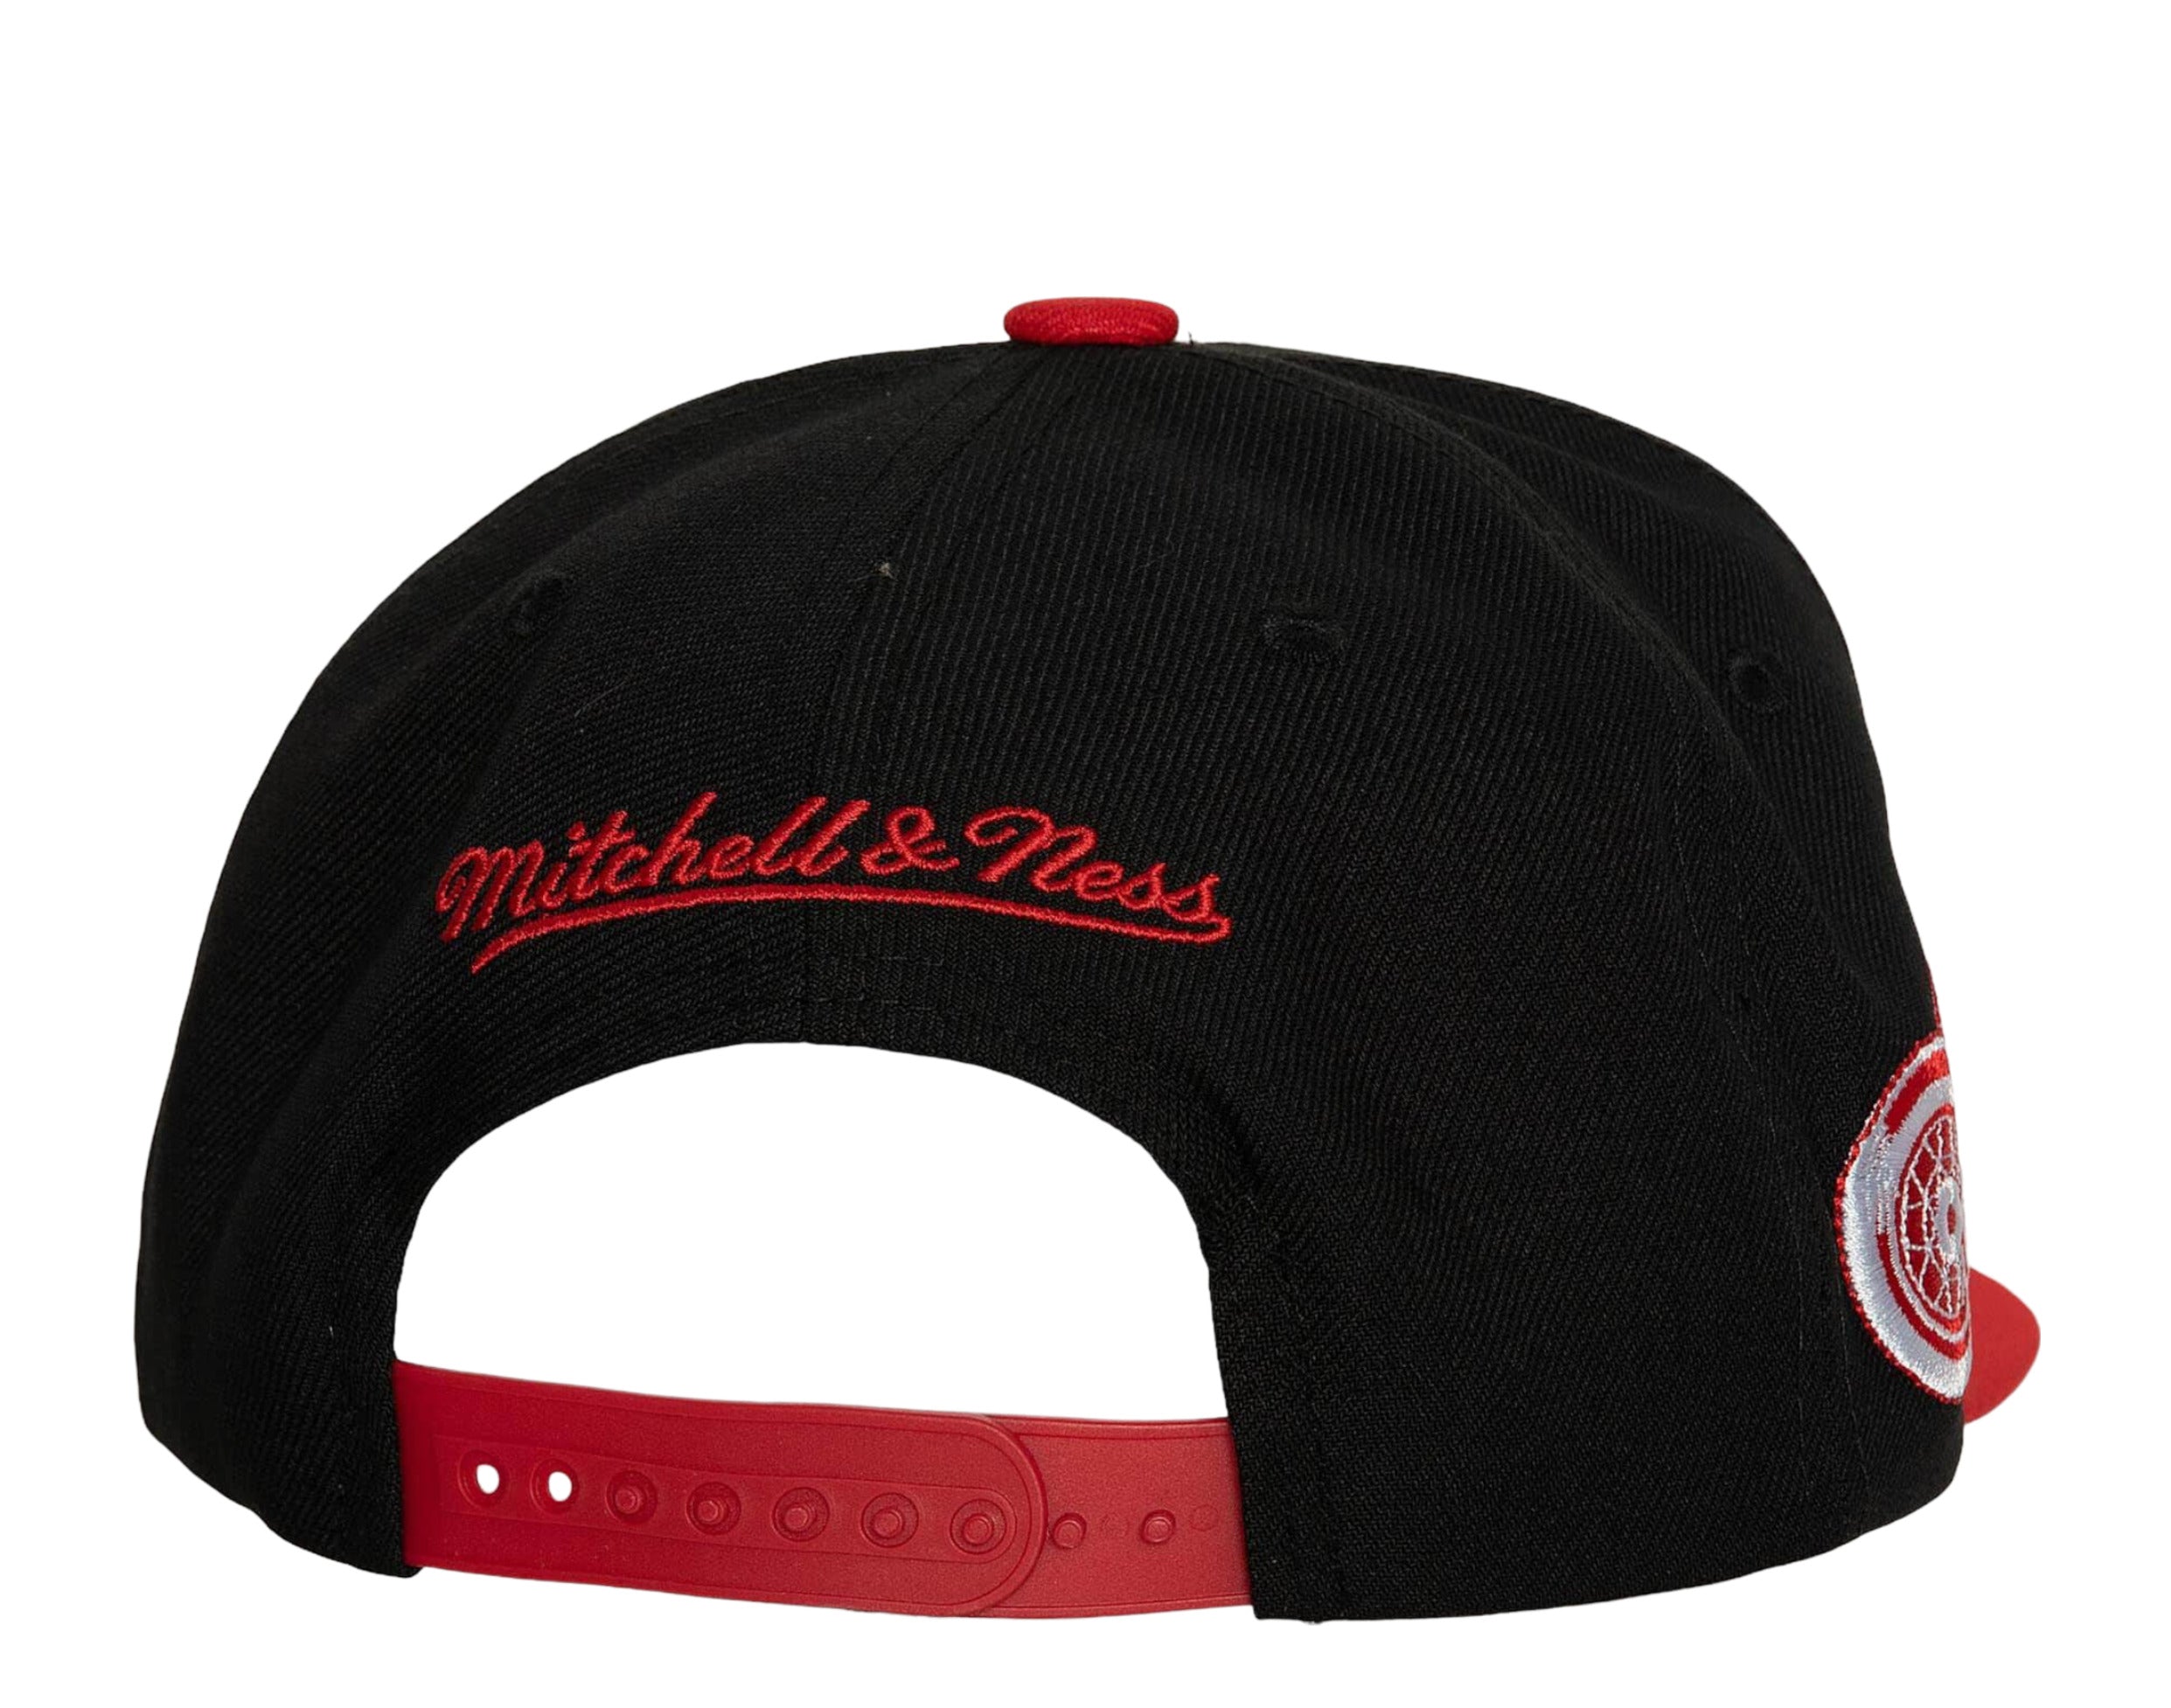 Detroit Red Wings Vintage Script Black/Red Snapback - Mitchell